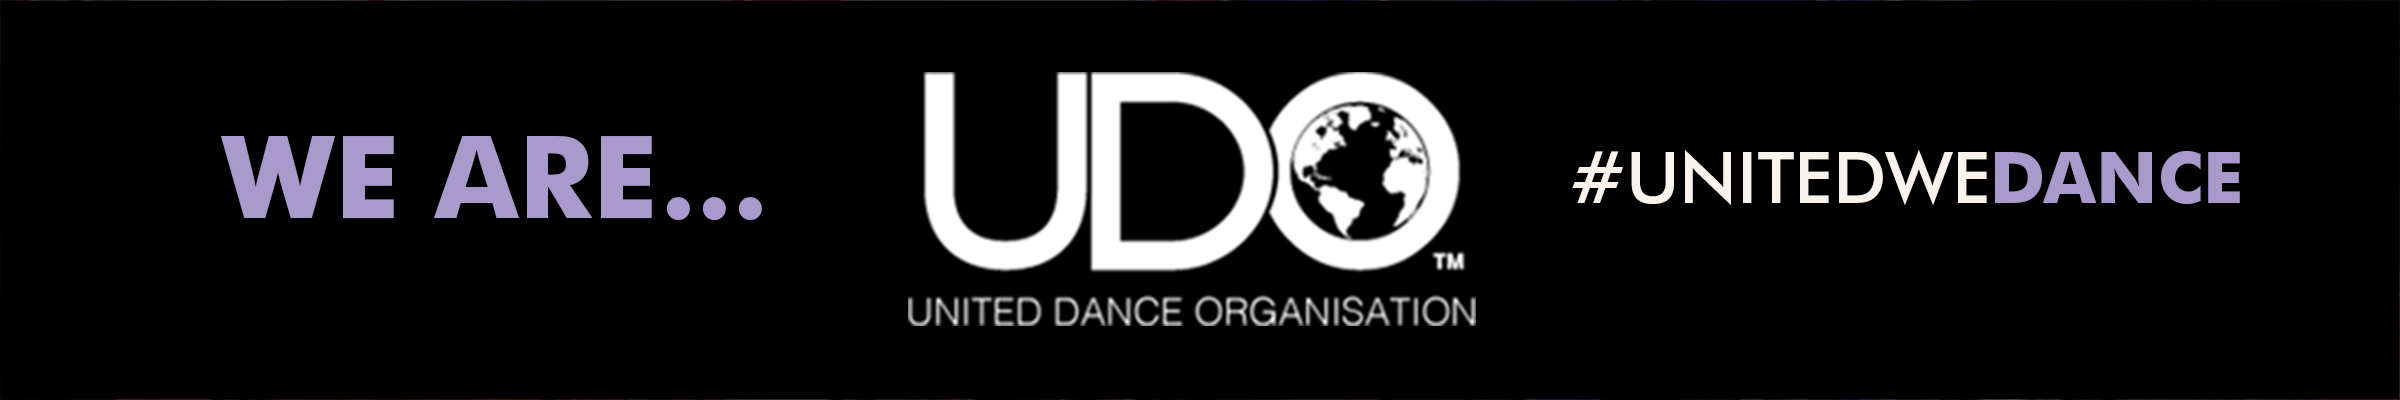 We are the United Dance Organisation UDO